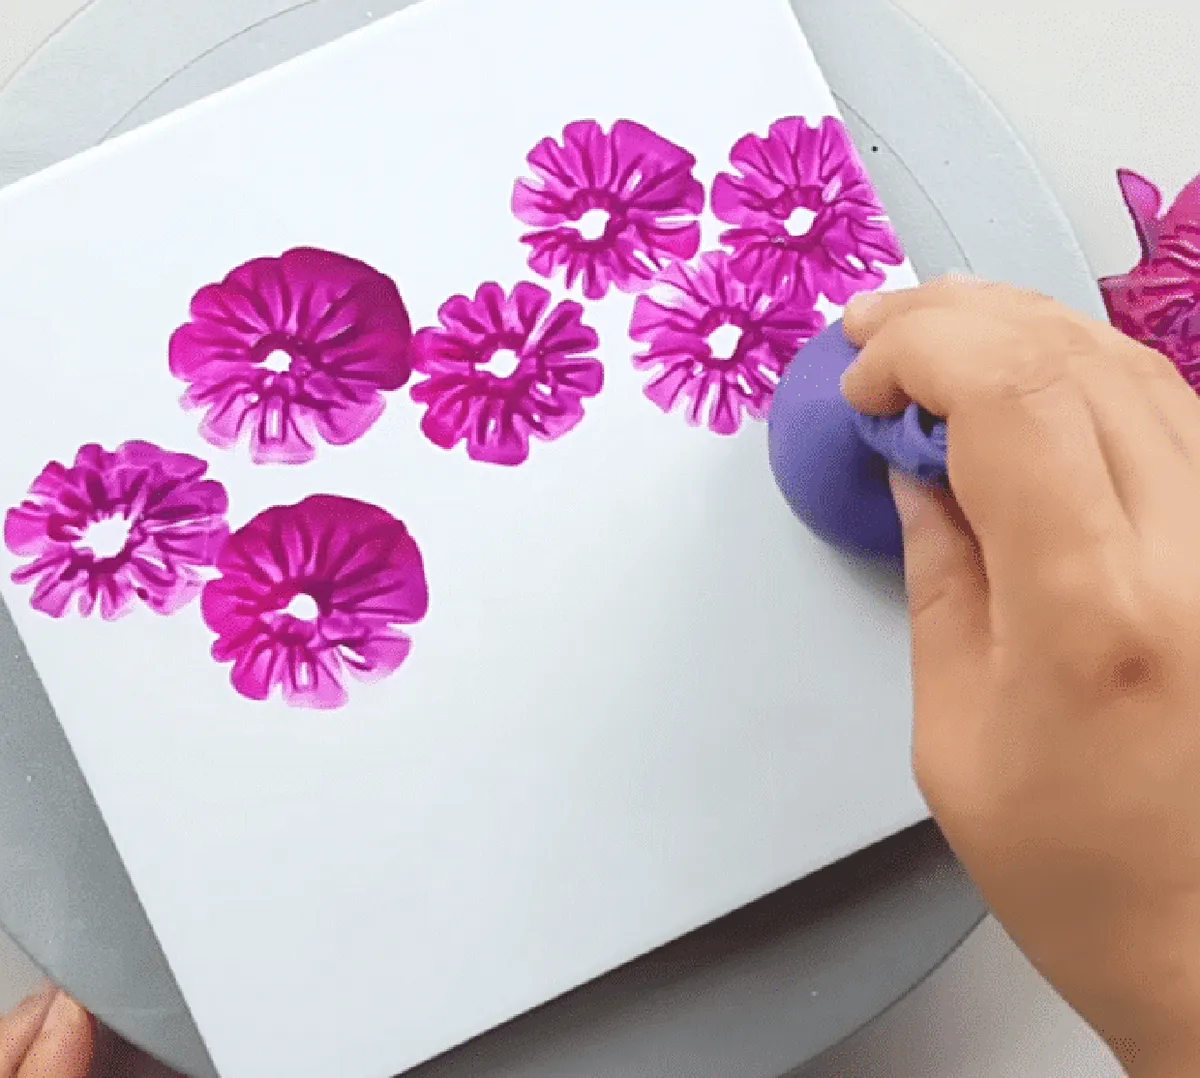 spring art projects - How-to-Paint-Flowers-With-a-Balloon-Instructions